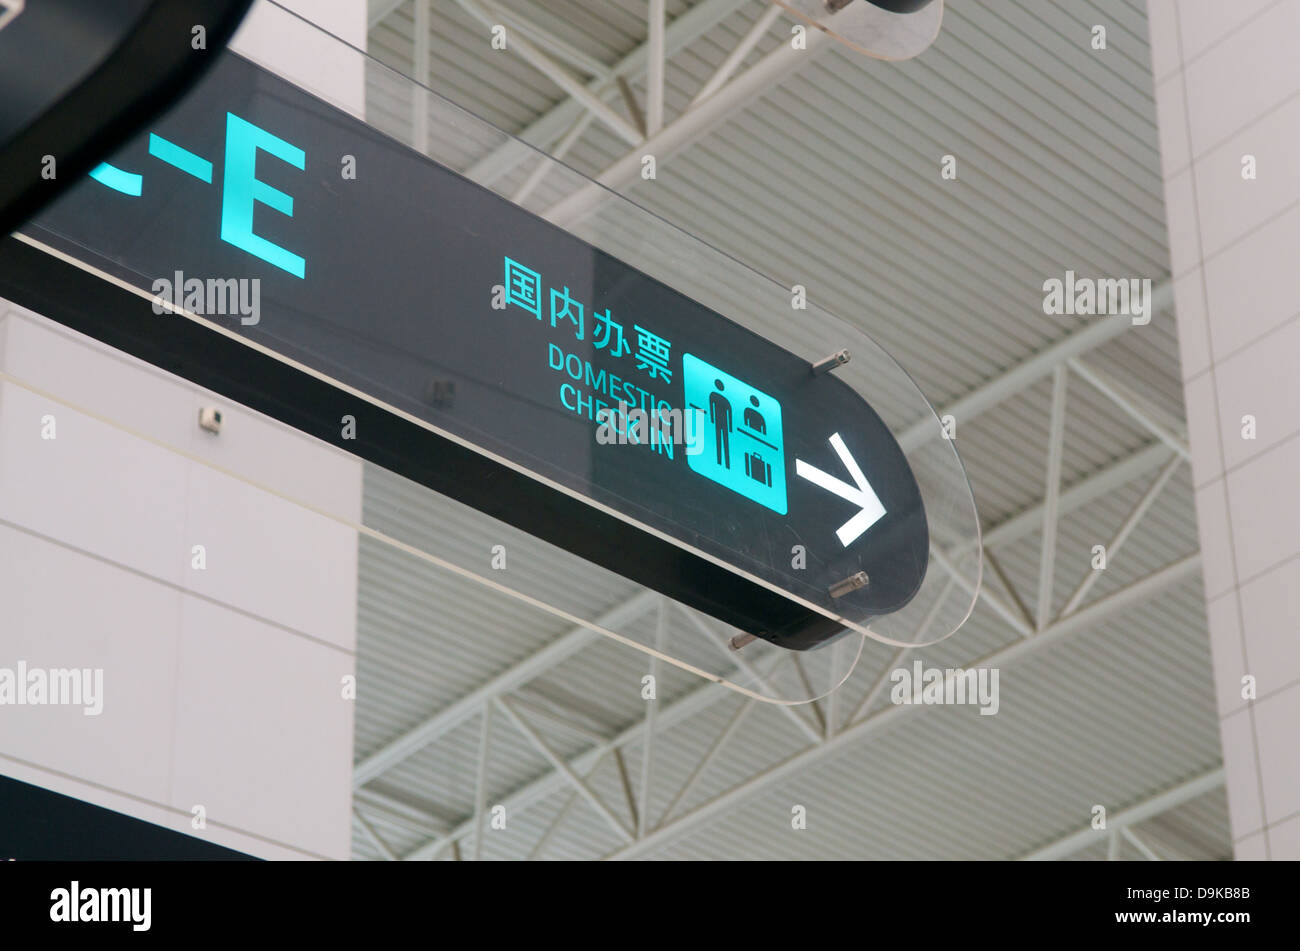 Airport domestic check in sign in Chinese Stock Photo